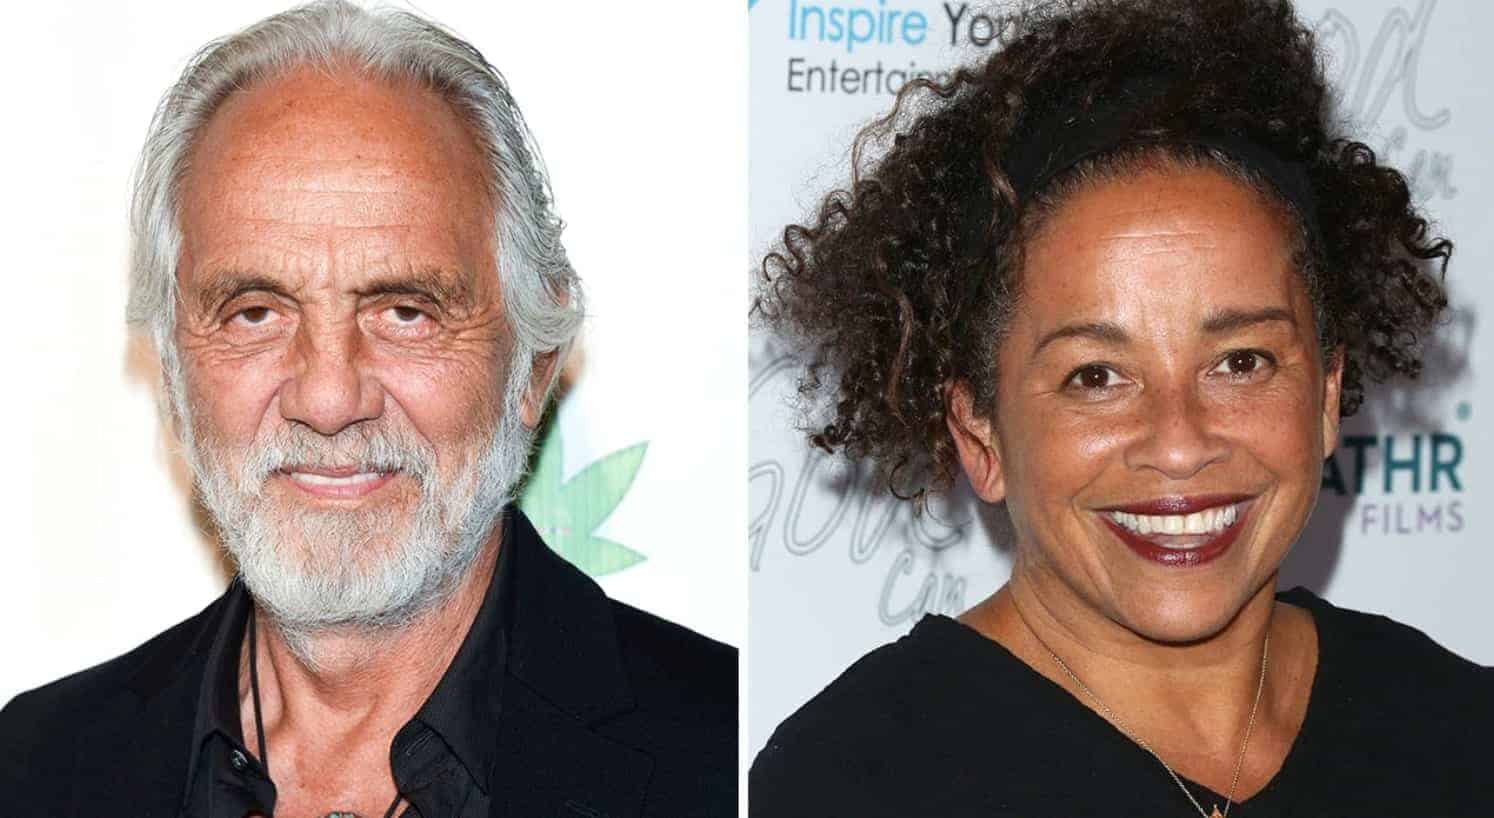 Image of Rae Dawn Chong and her father, Tommy Chong